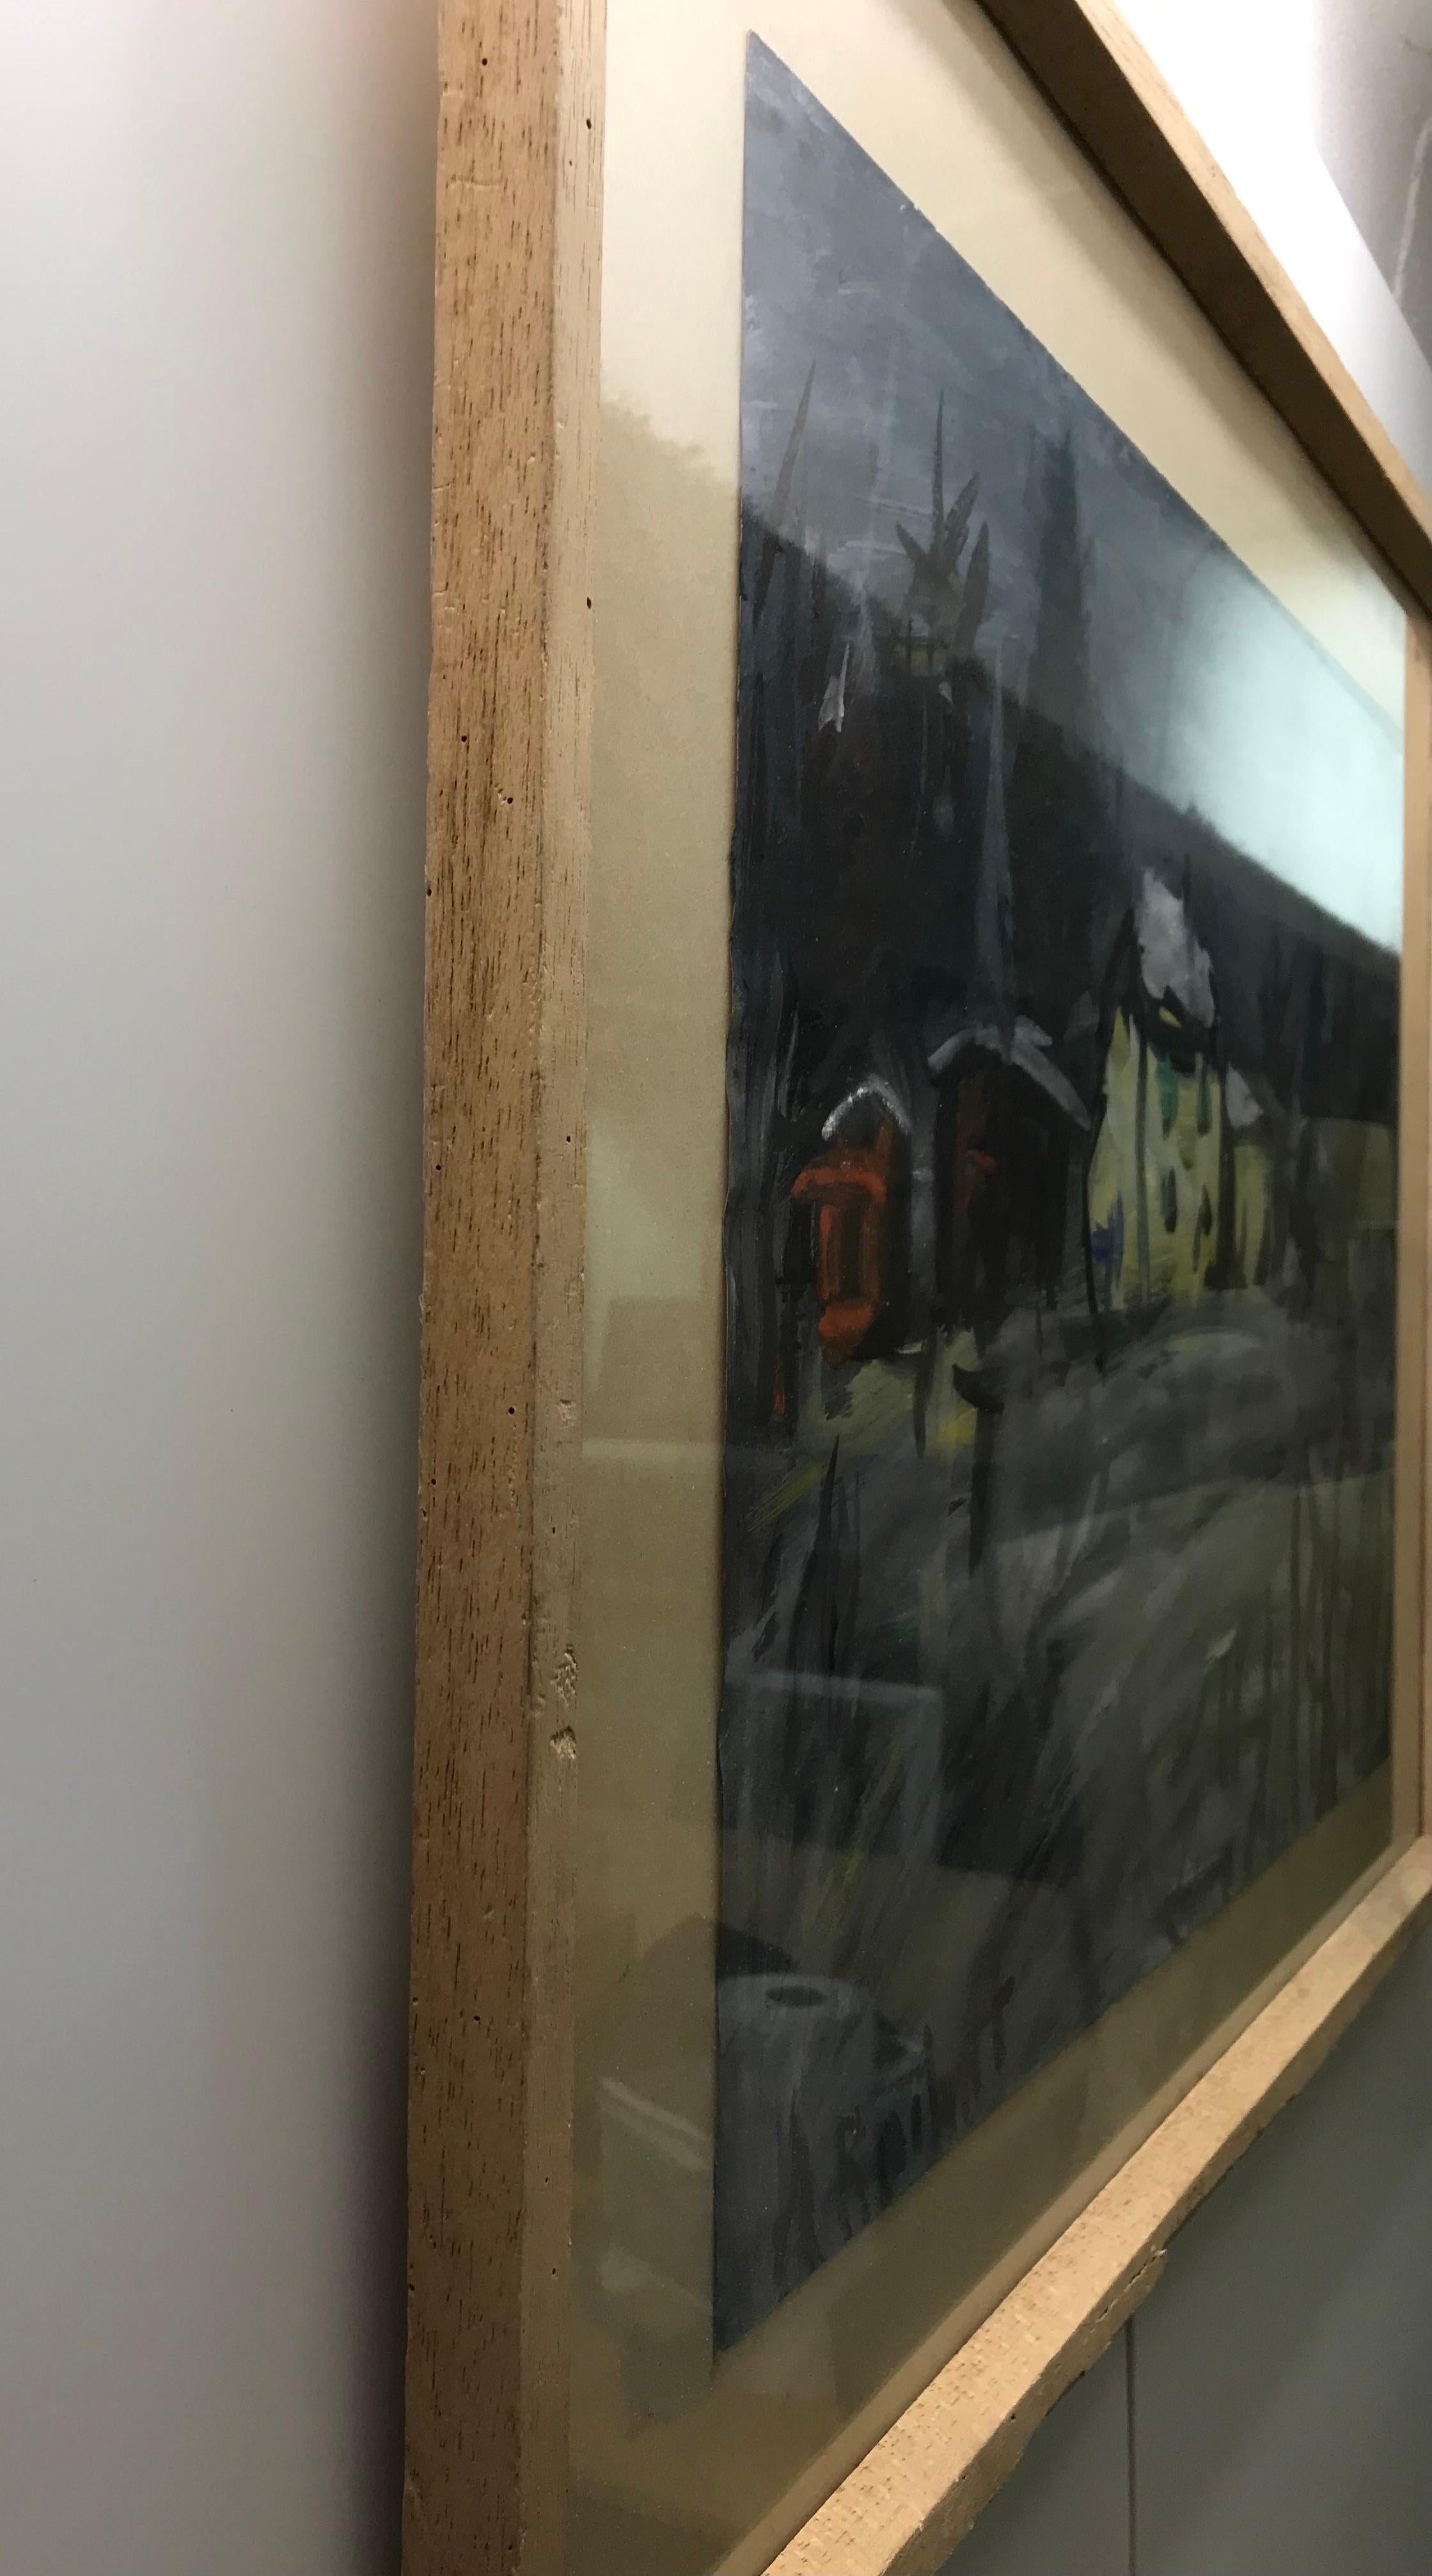 Work on paper
Light brown wooden frame with glass pane
58,5 x 79 x 2 cm